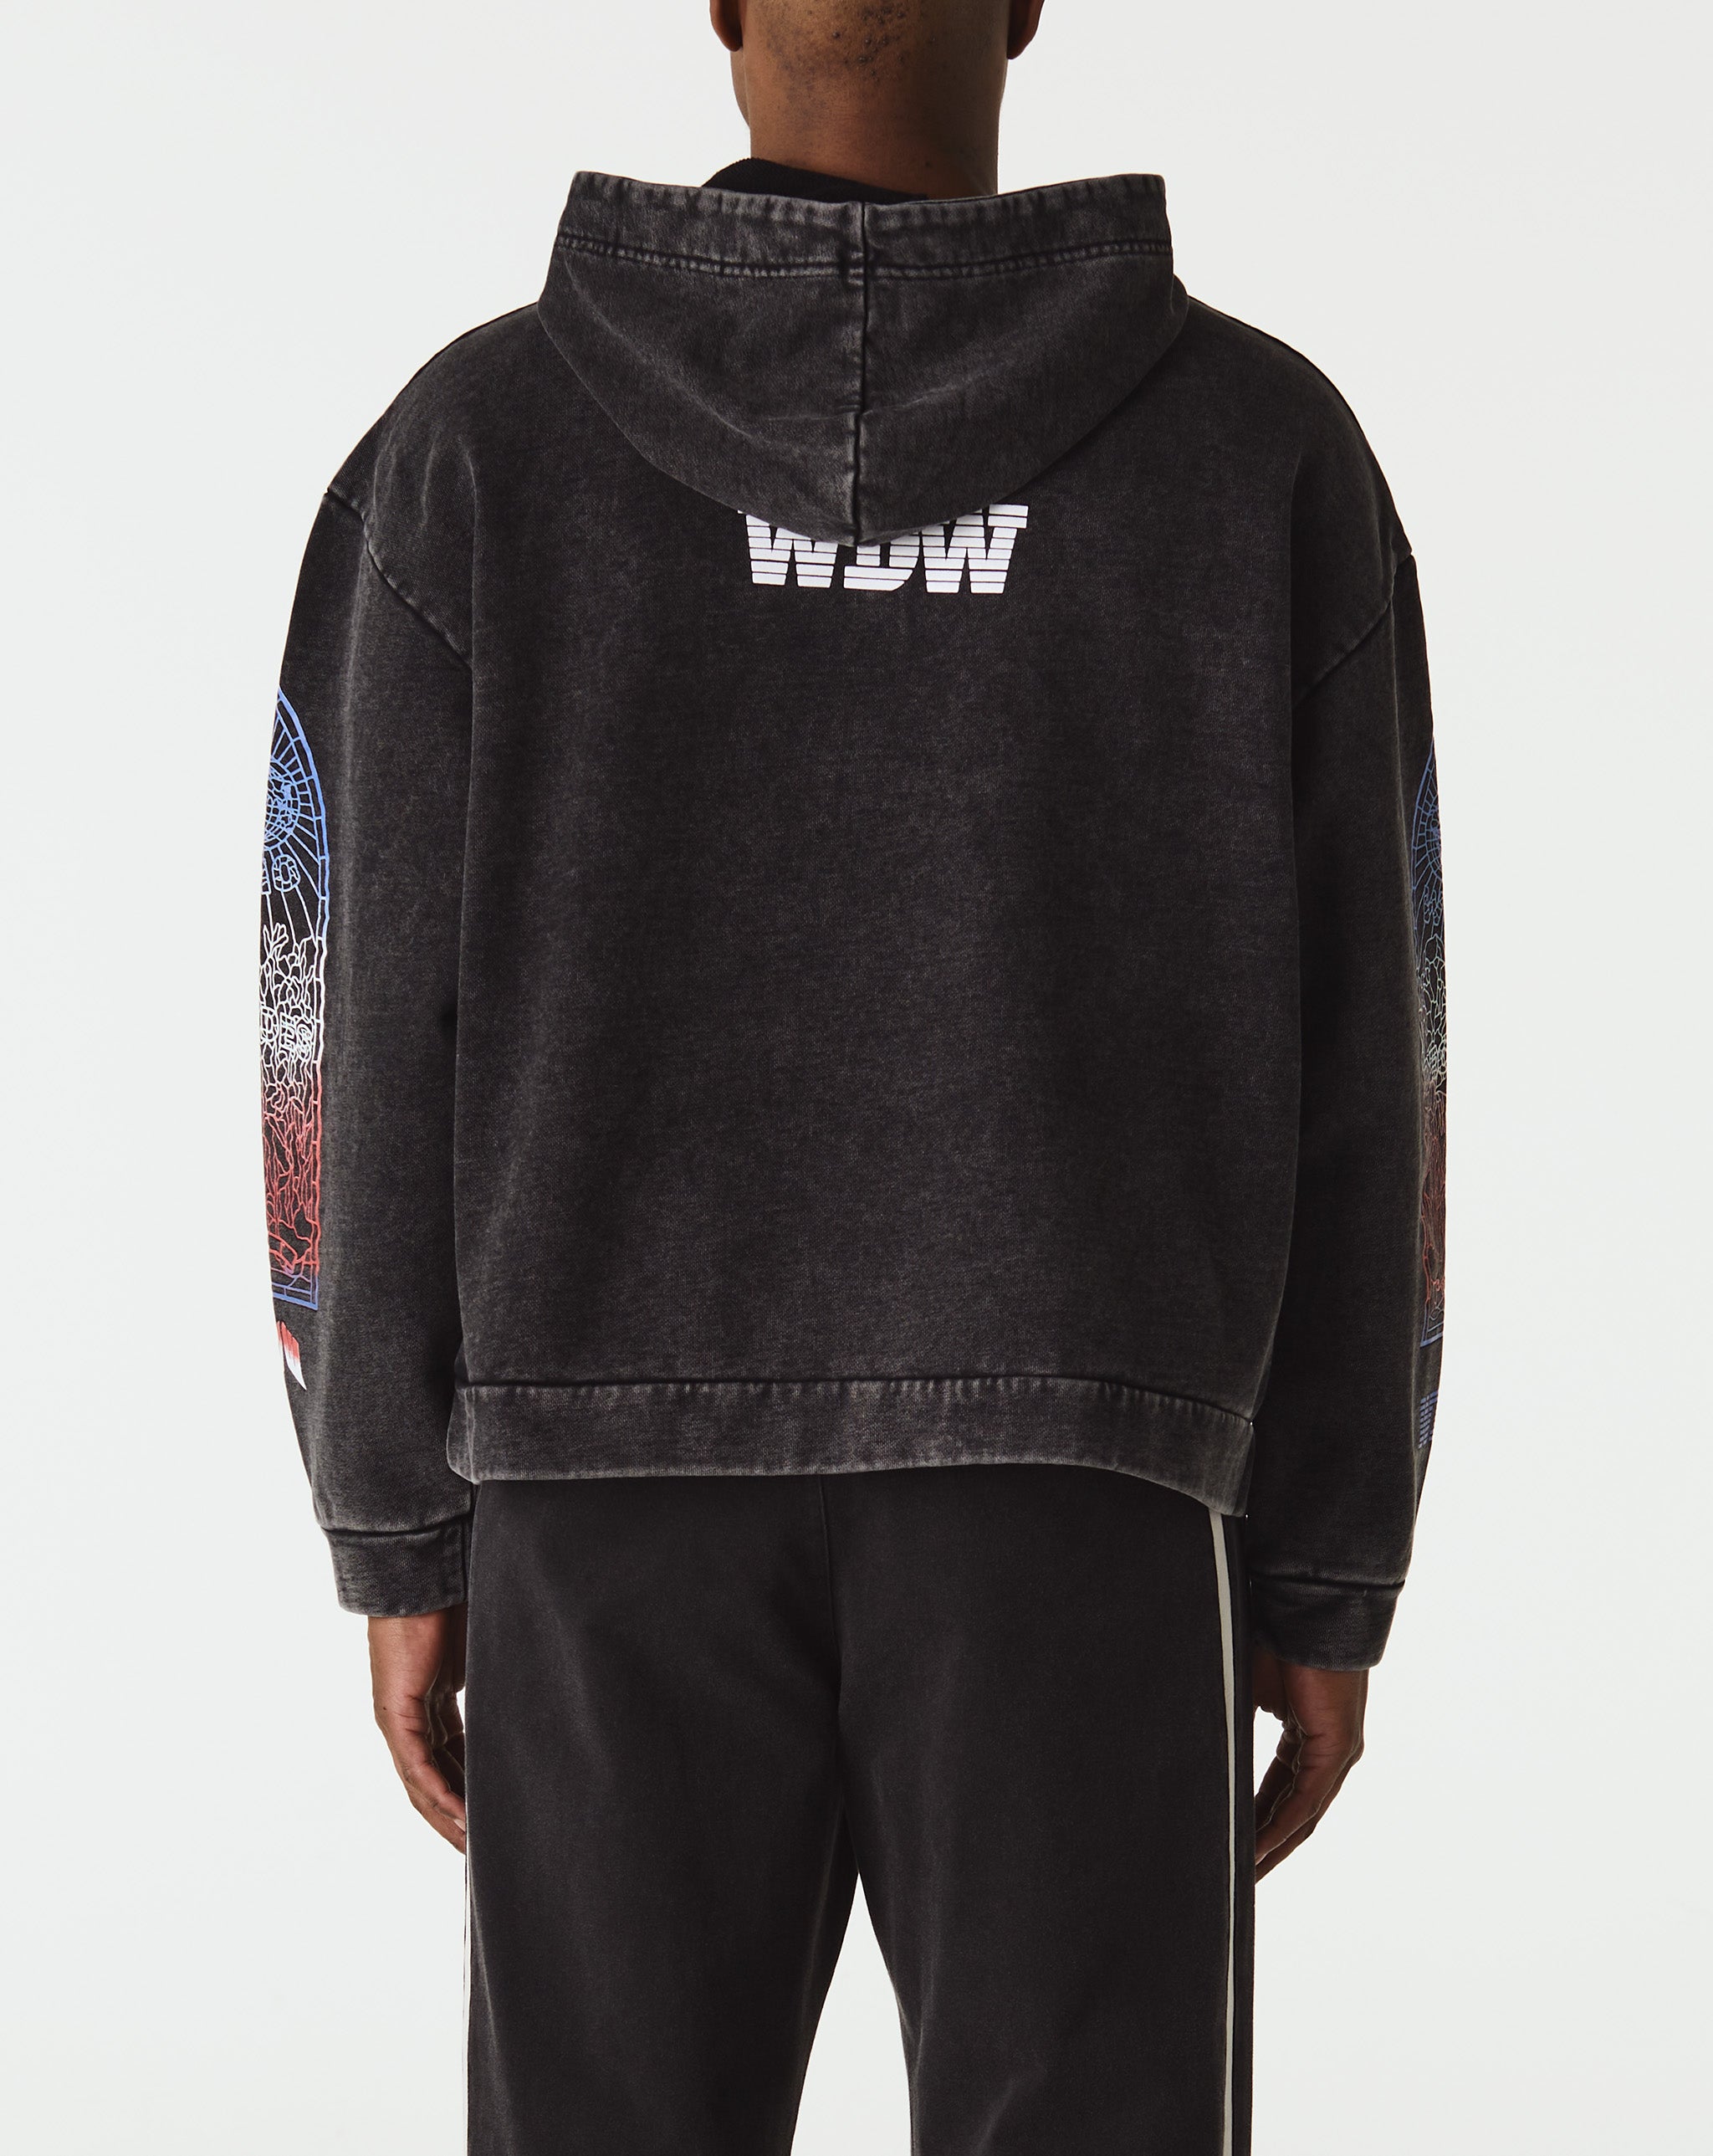 Who Decides War Intertwined Windows Hoodie  - XHIBITION